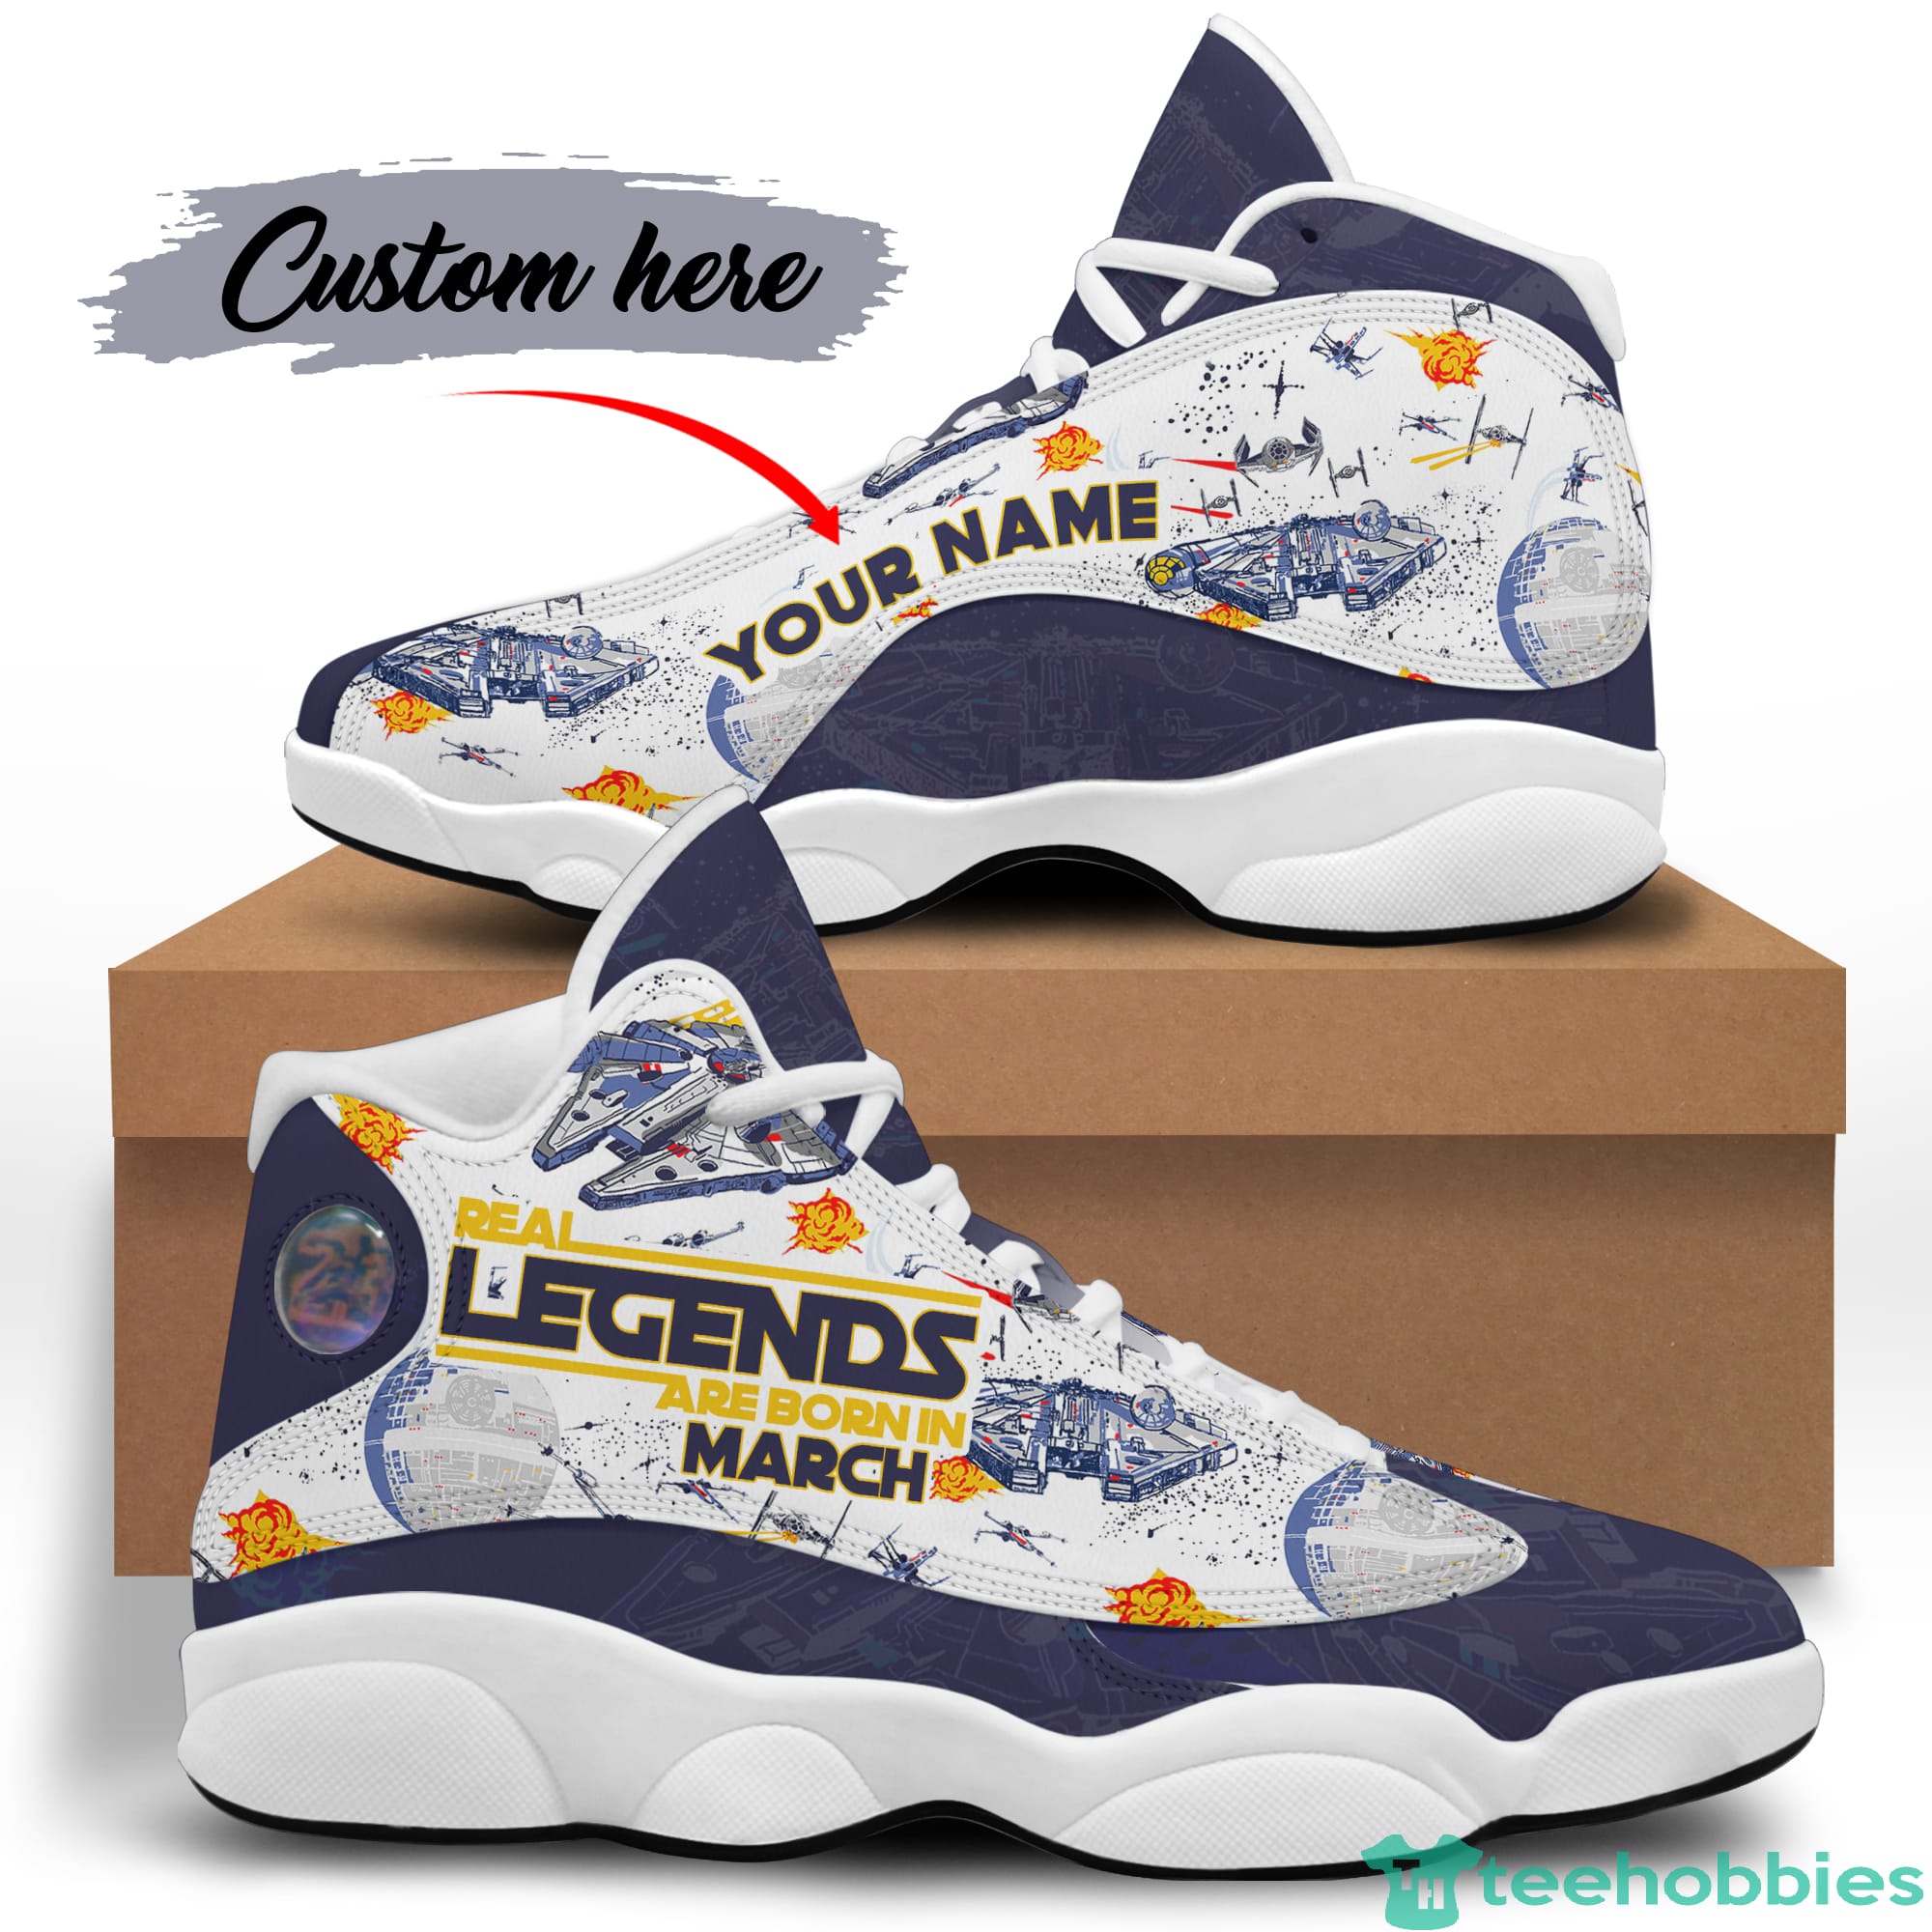 March Real Legend Personalized Name Air Jordan 13 Shoes 96